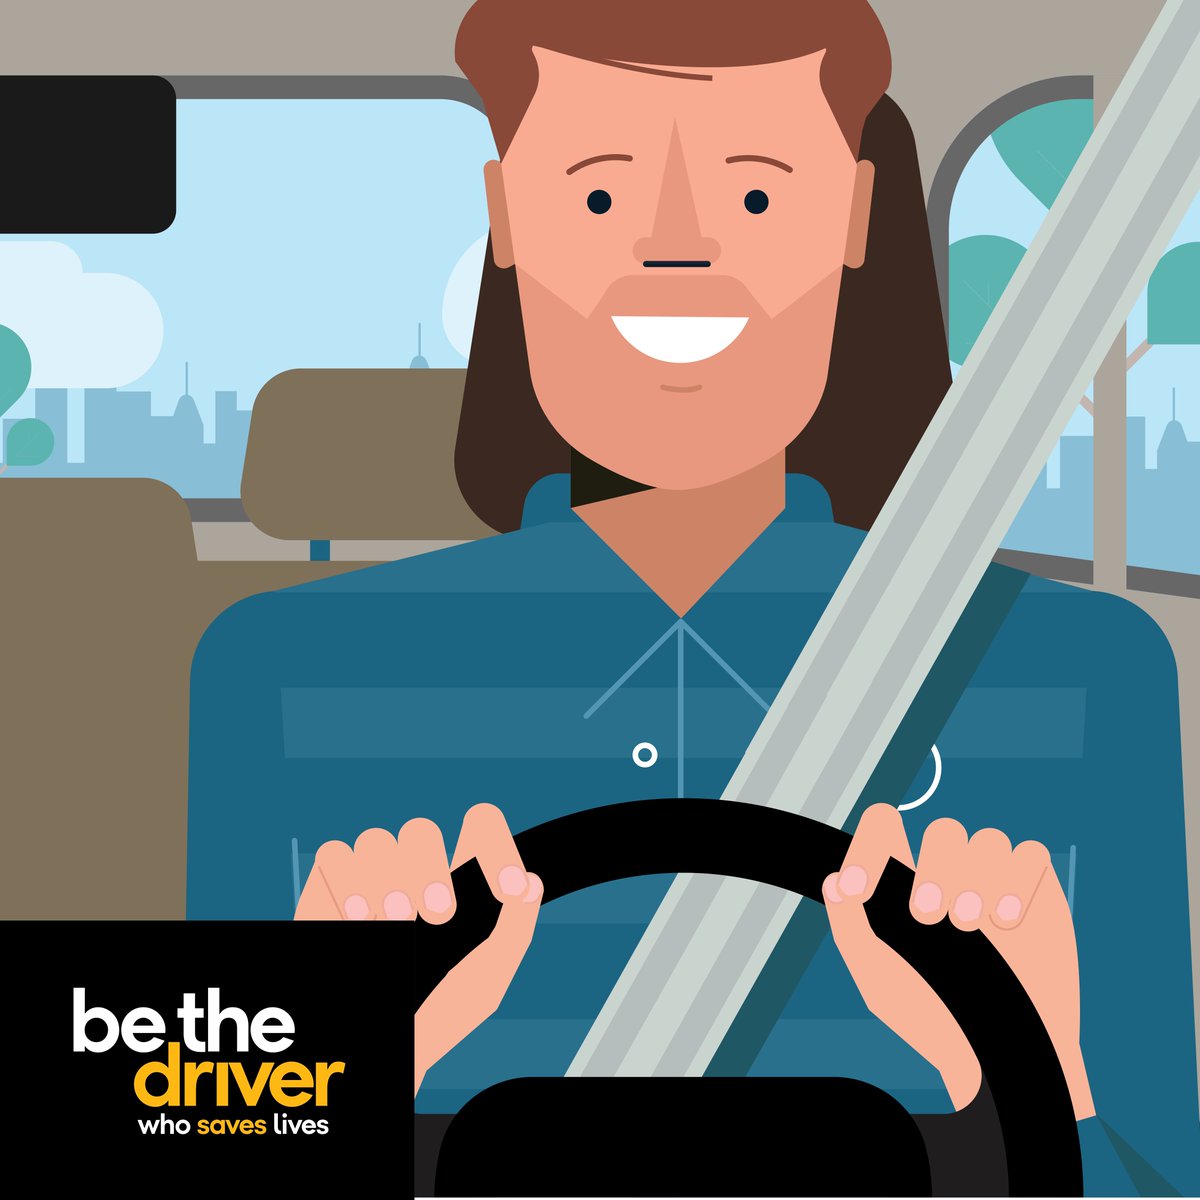 Failure to wear a seat belt is a leading cause of vehicle crash fatalities in the state of #Maryland. #BeTheDriver #SeatBeltSafety #ClickItOrTicket 

#MDOTsafey